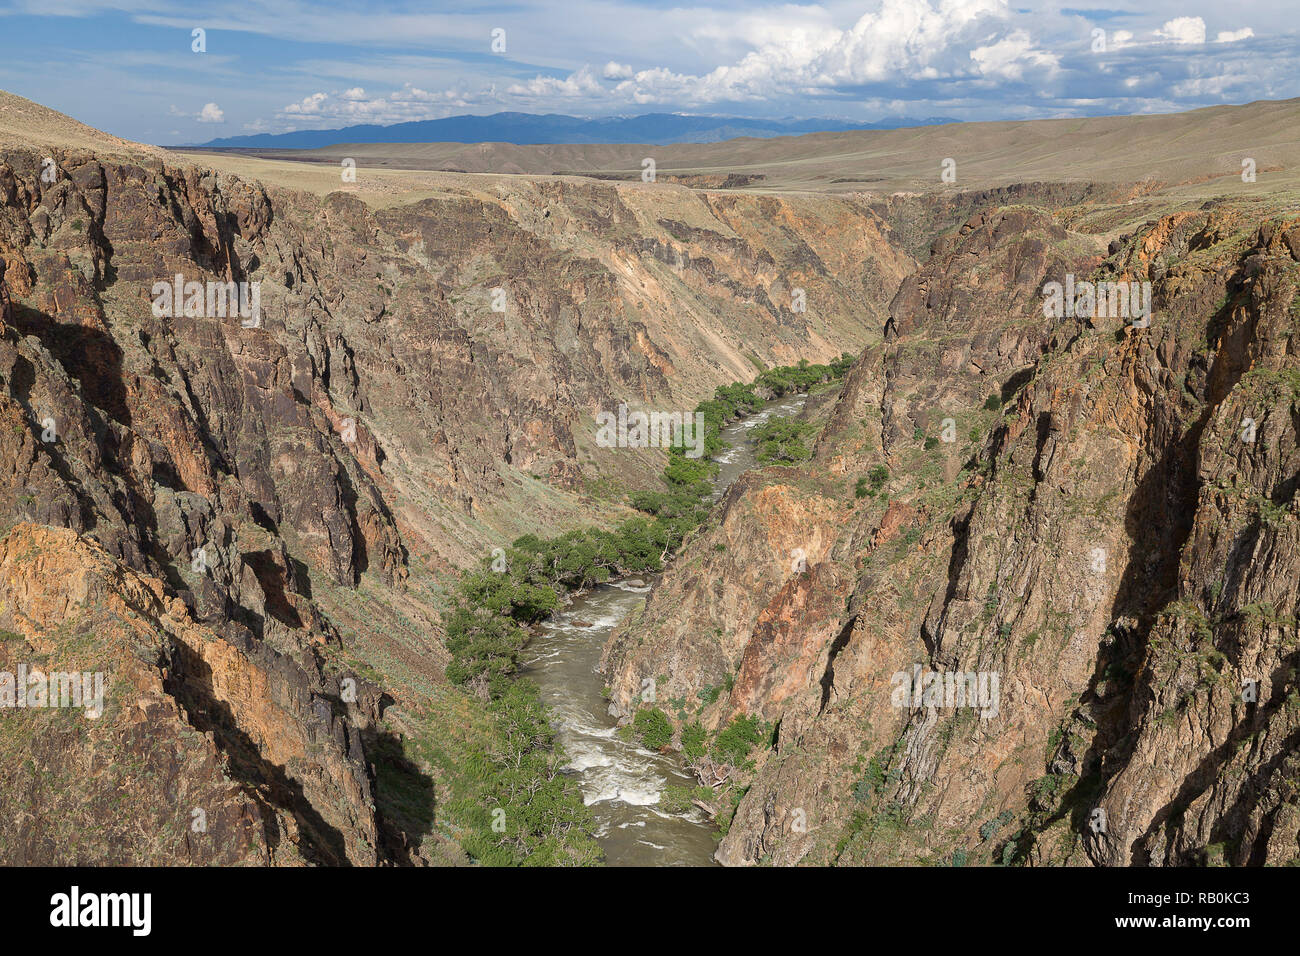 Charyn Canyon des Flusses als Black Canyon, in Kasachstan bekannt. Stockfoto